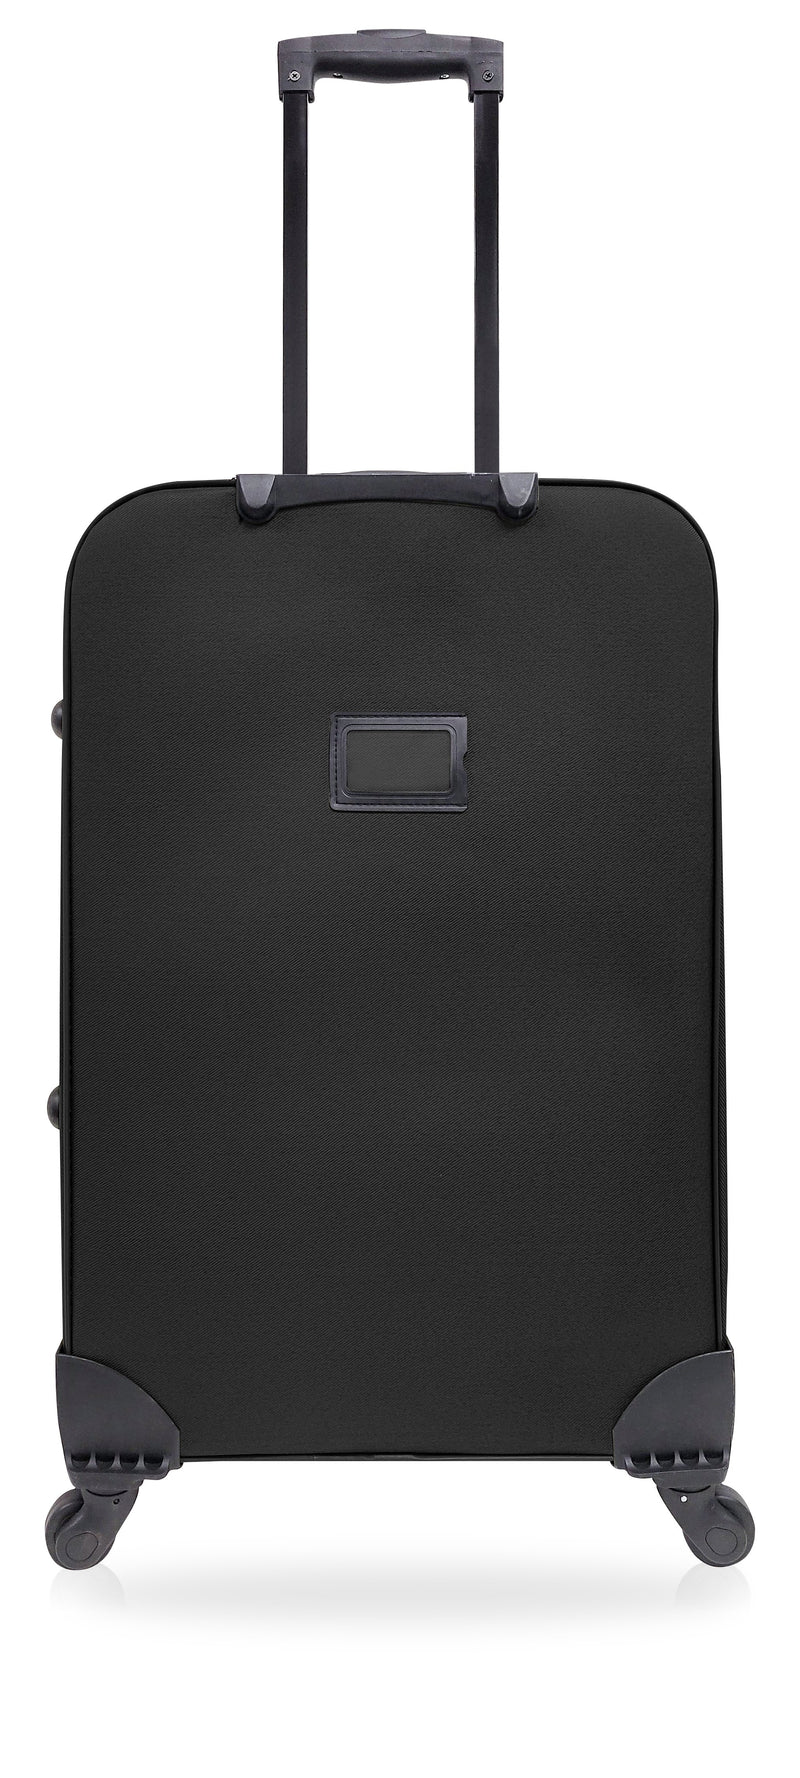 TOSCANO by Tucci 32-inch Allacciare Lightweight Luggage Suitcase